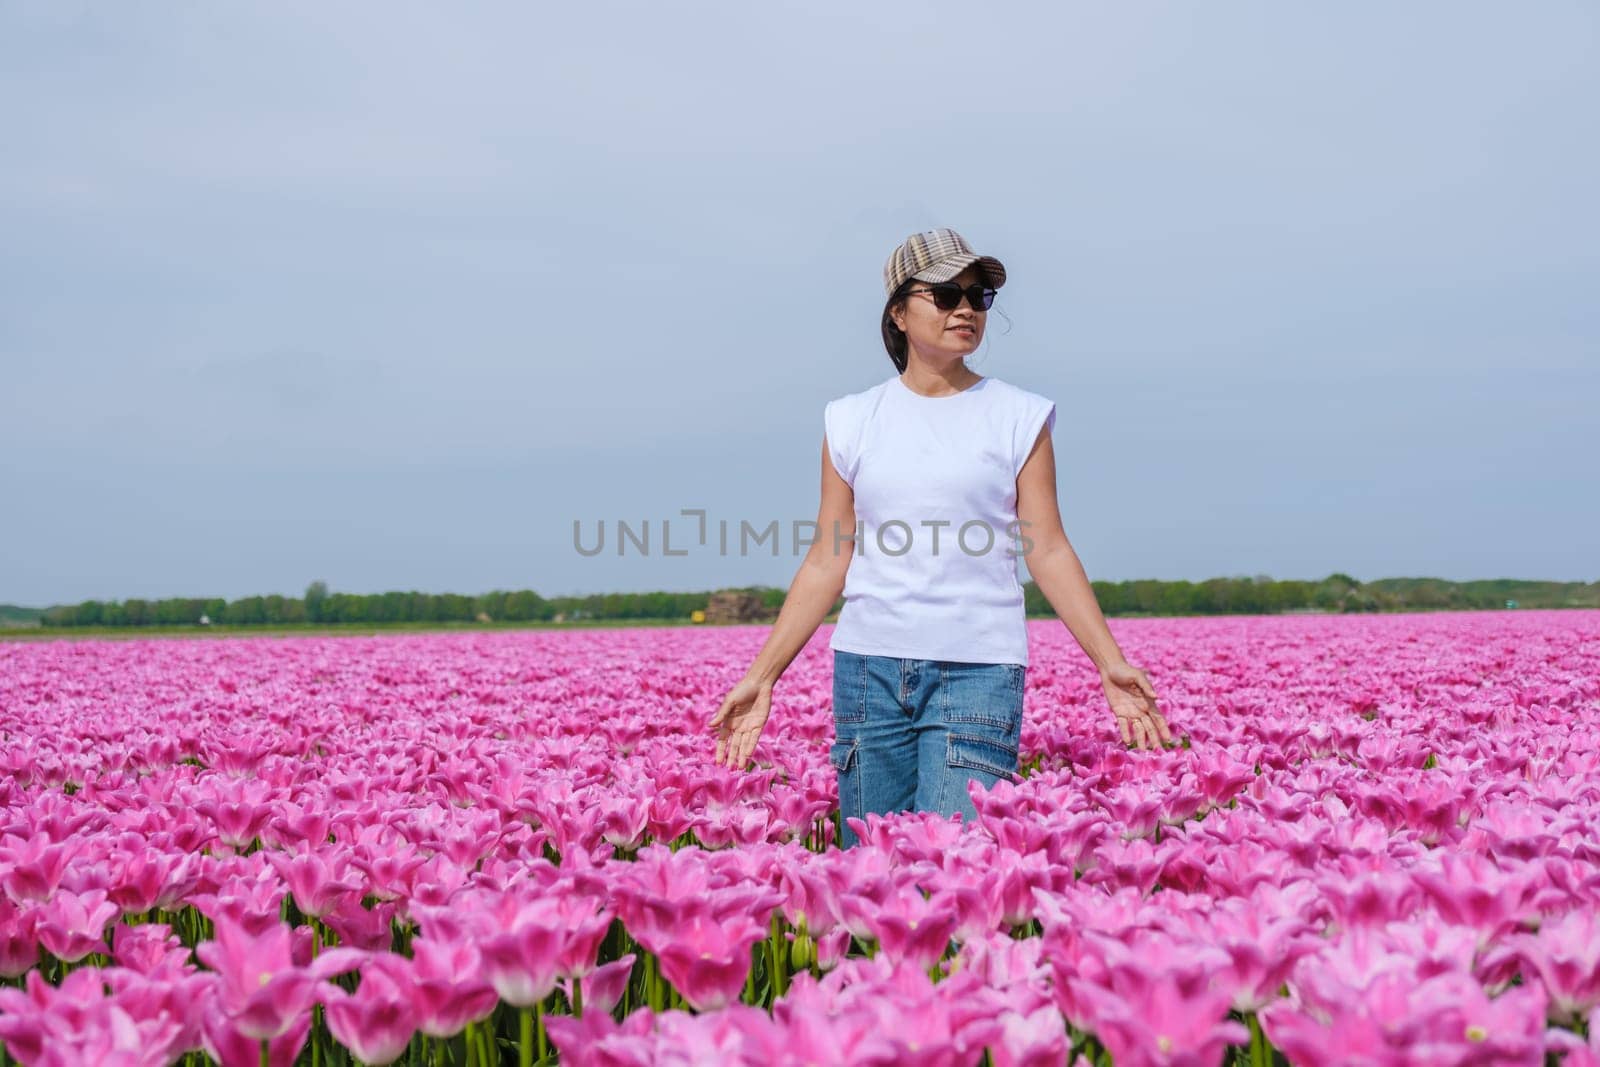 A woman elegantly stands amidst a vibrant sea of pink tulips in a field in Texel, Netherlands.